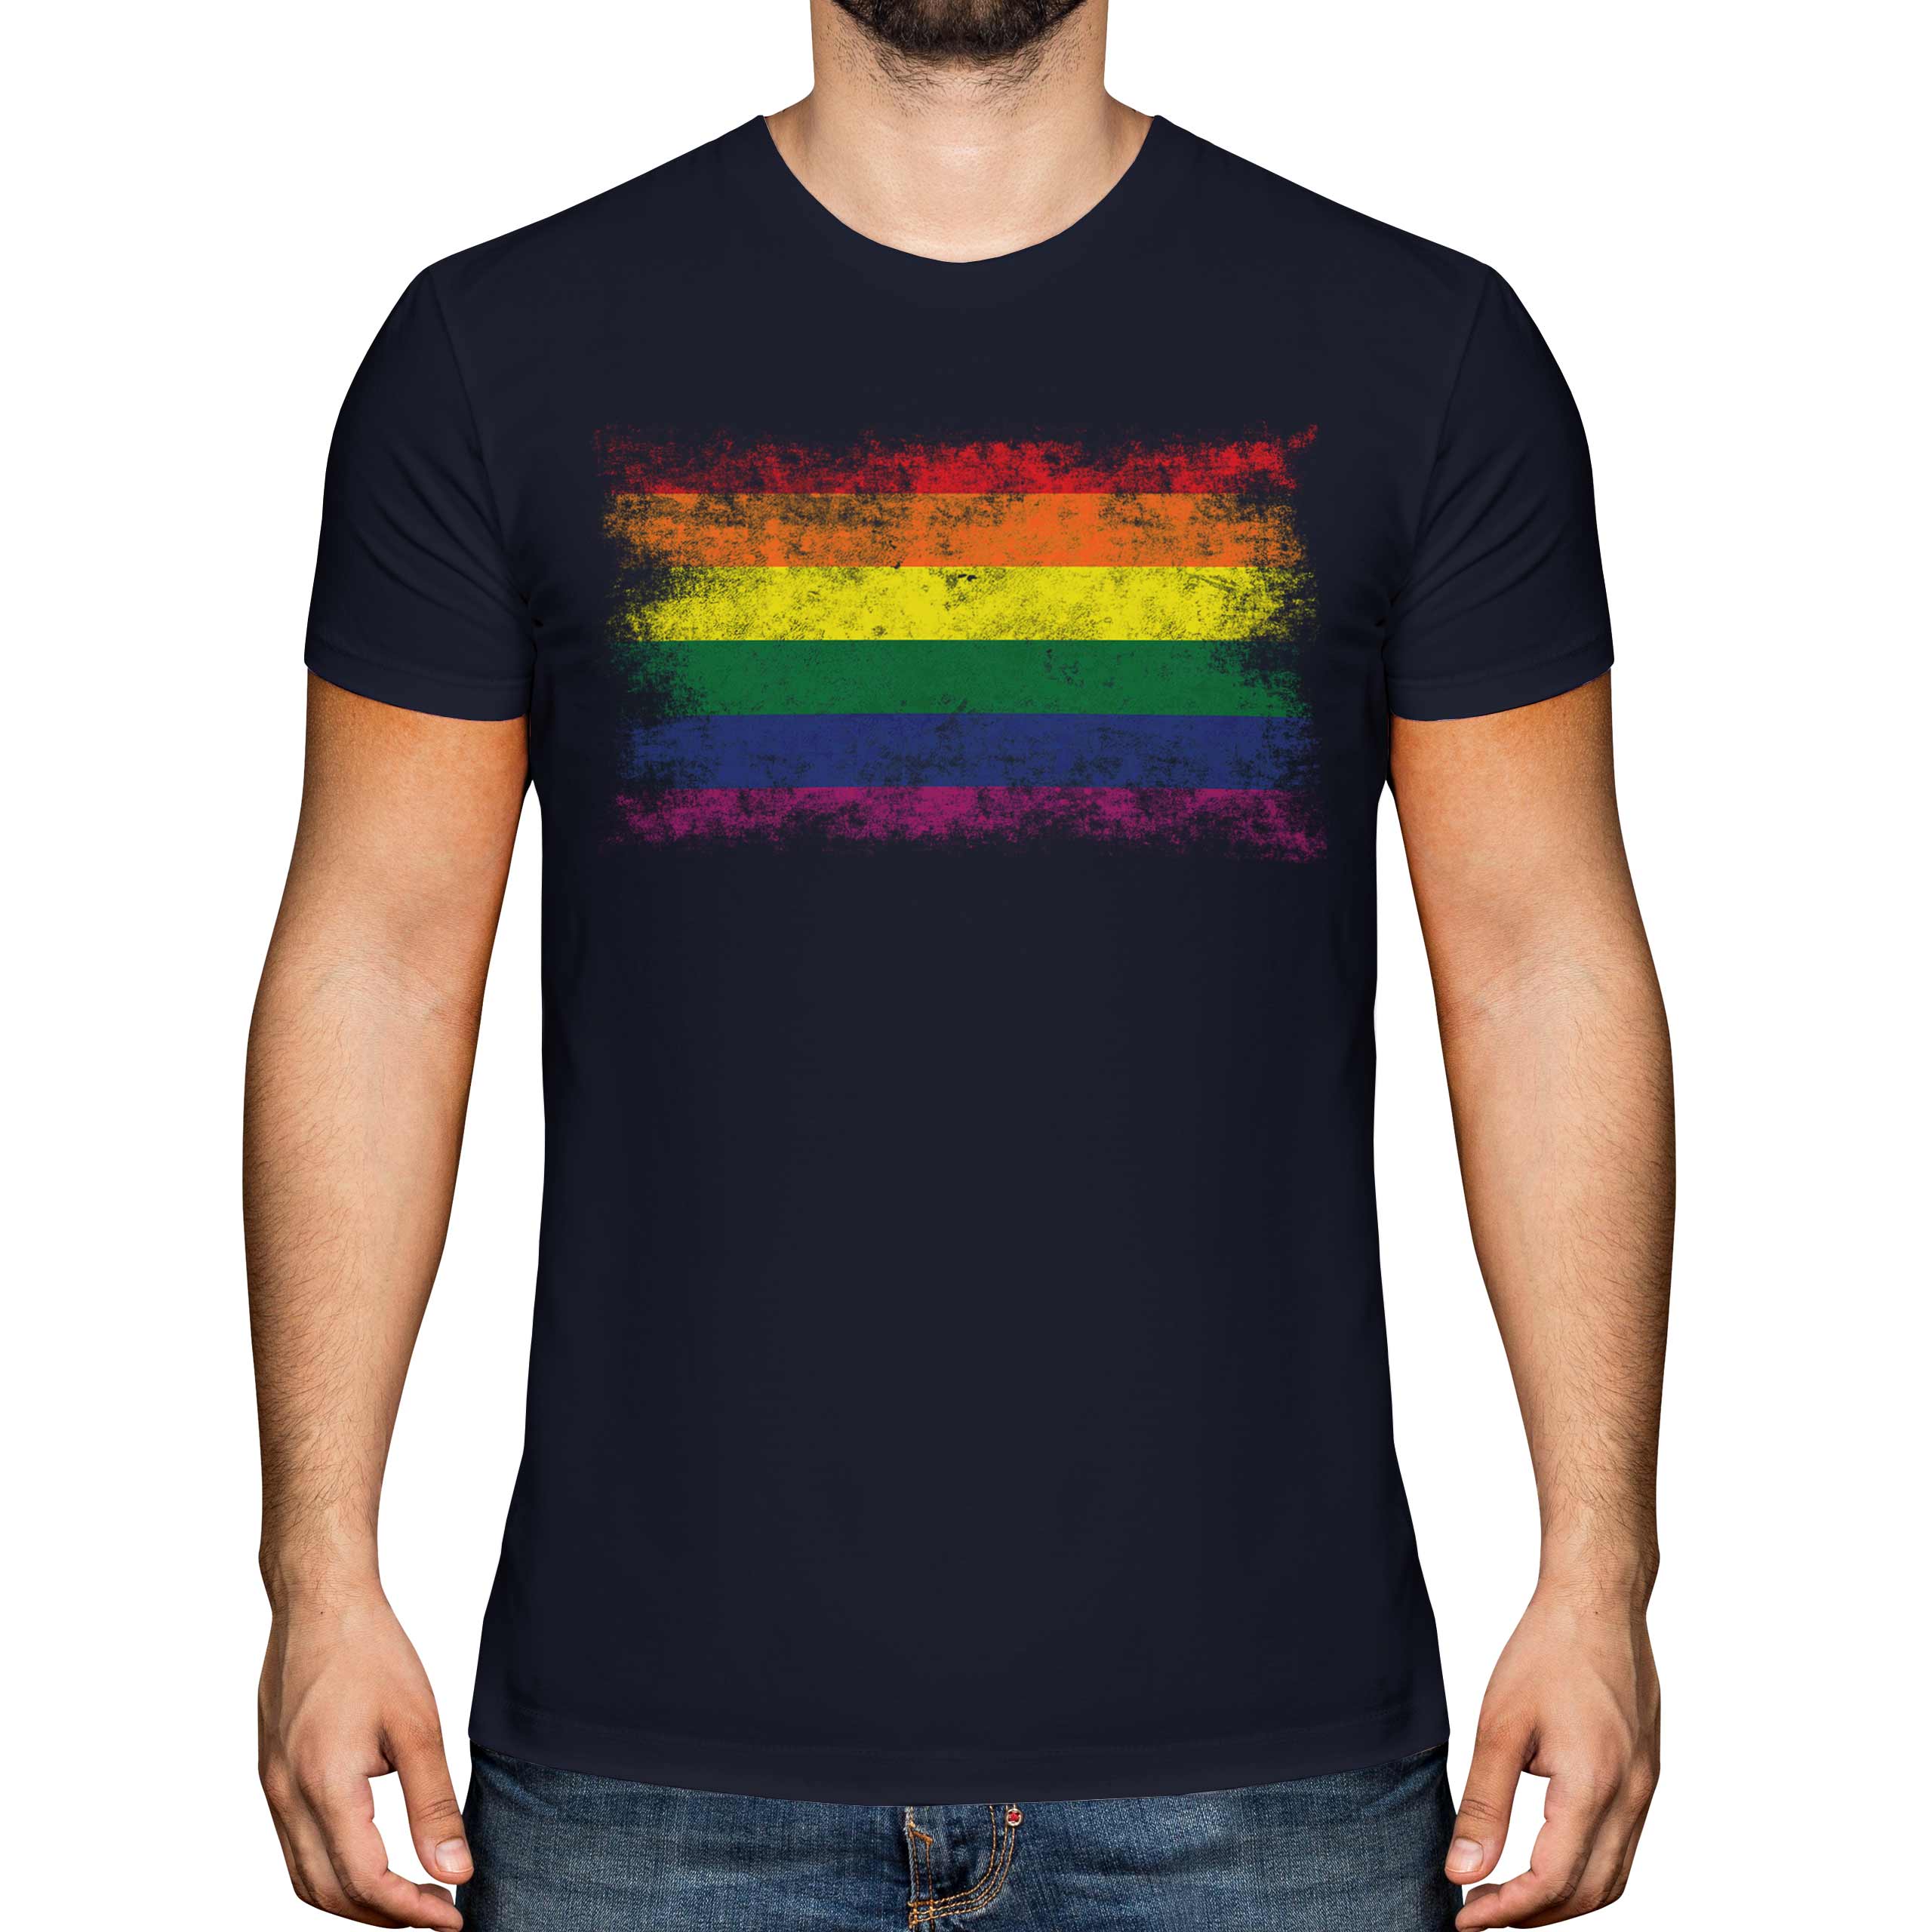 Trending Fashion  Gay fashion, Gay outfit, Queer fashion